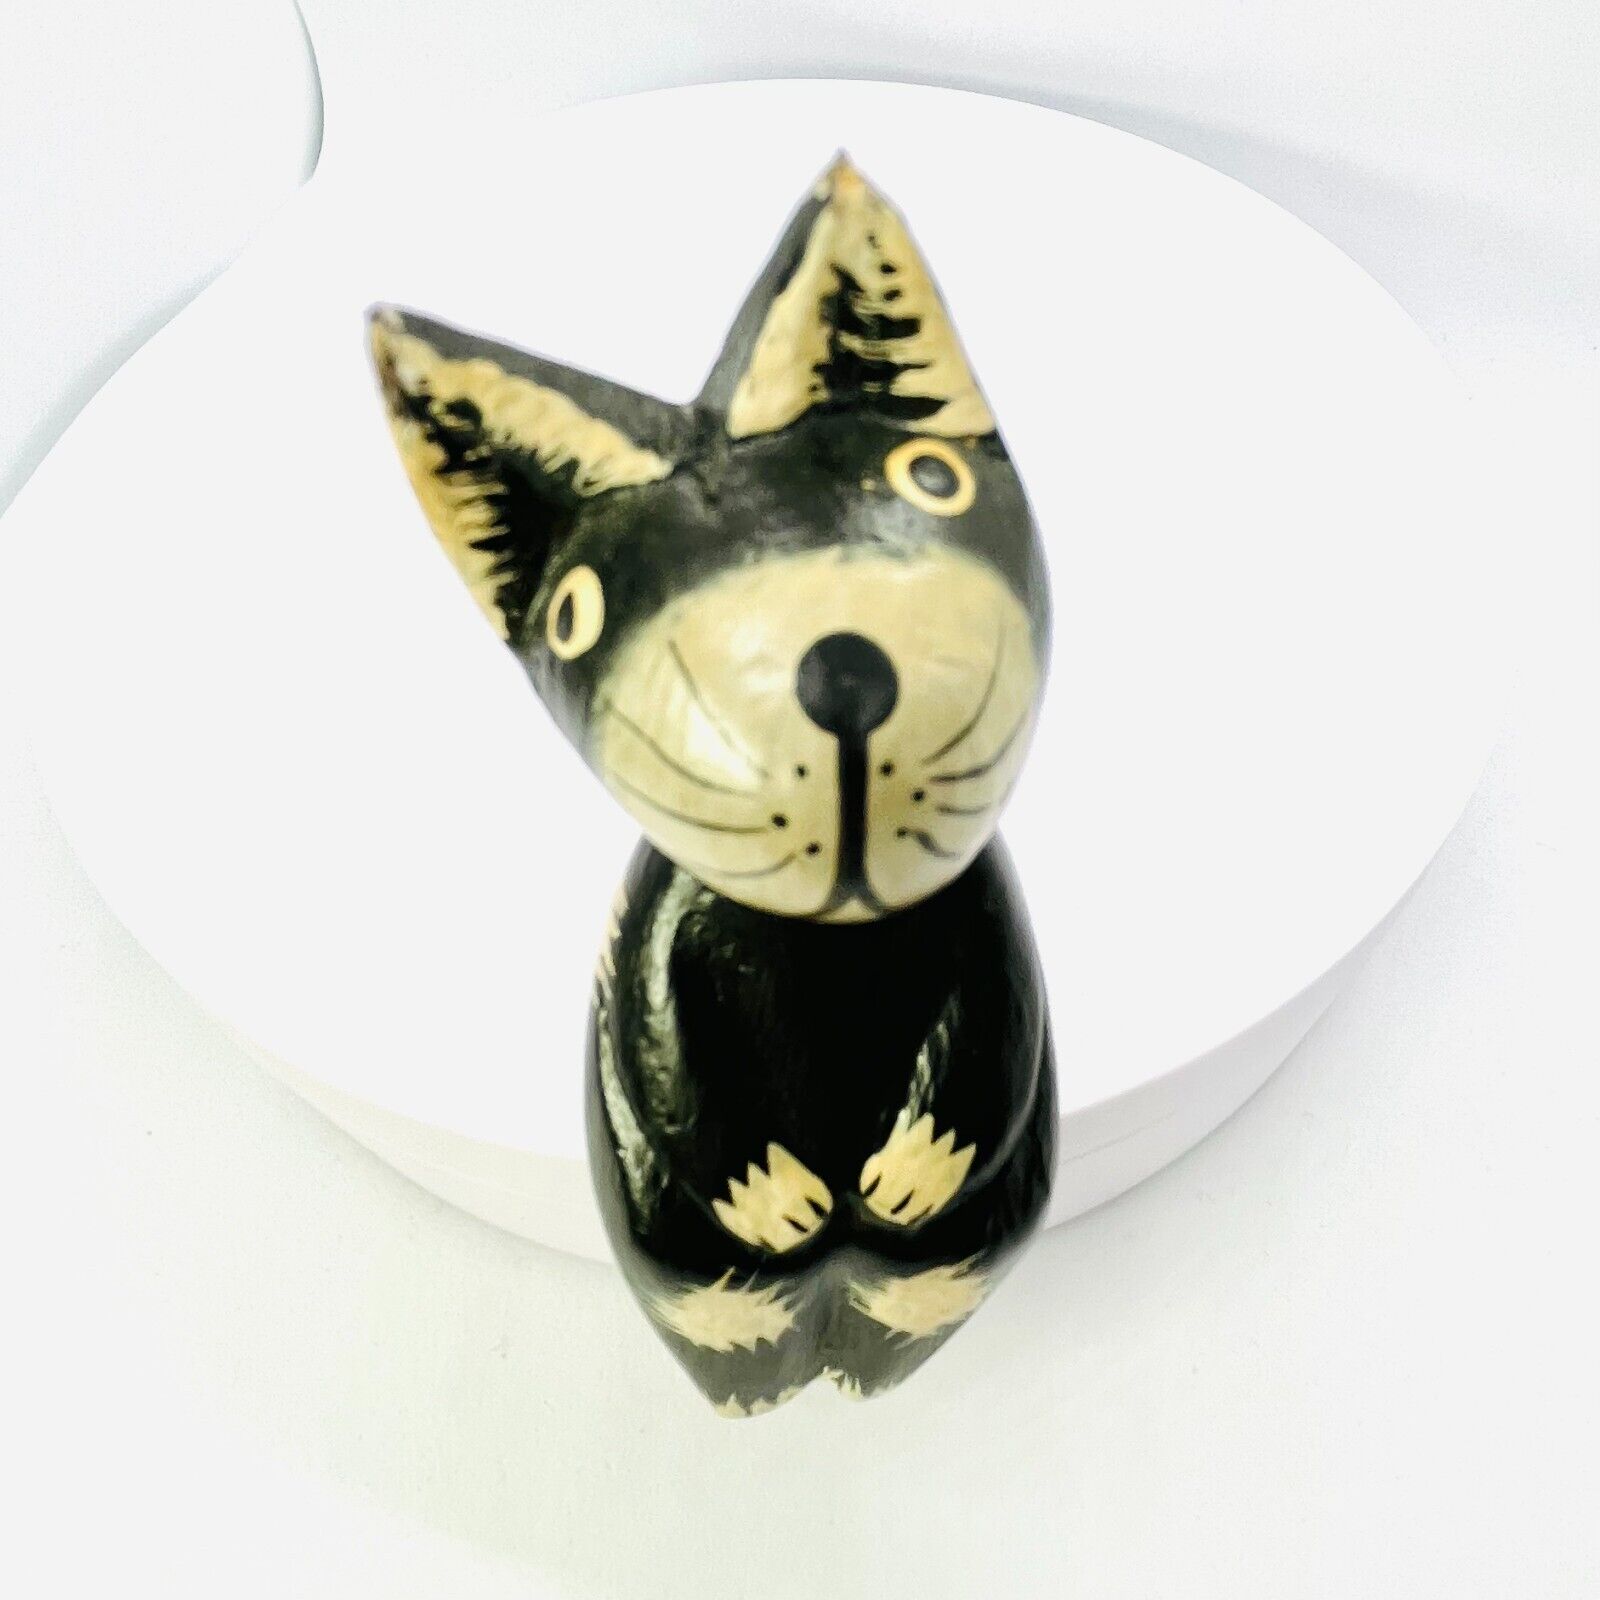 Bali Handmade Wooden Carved Cat Indonesia 1.6in